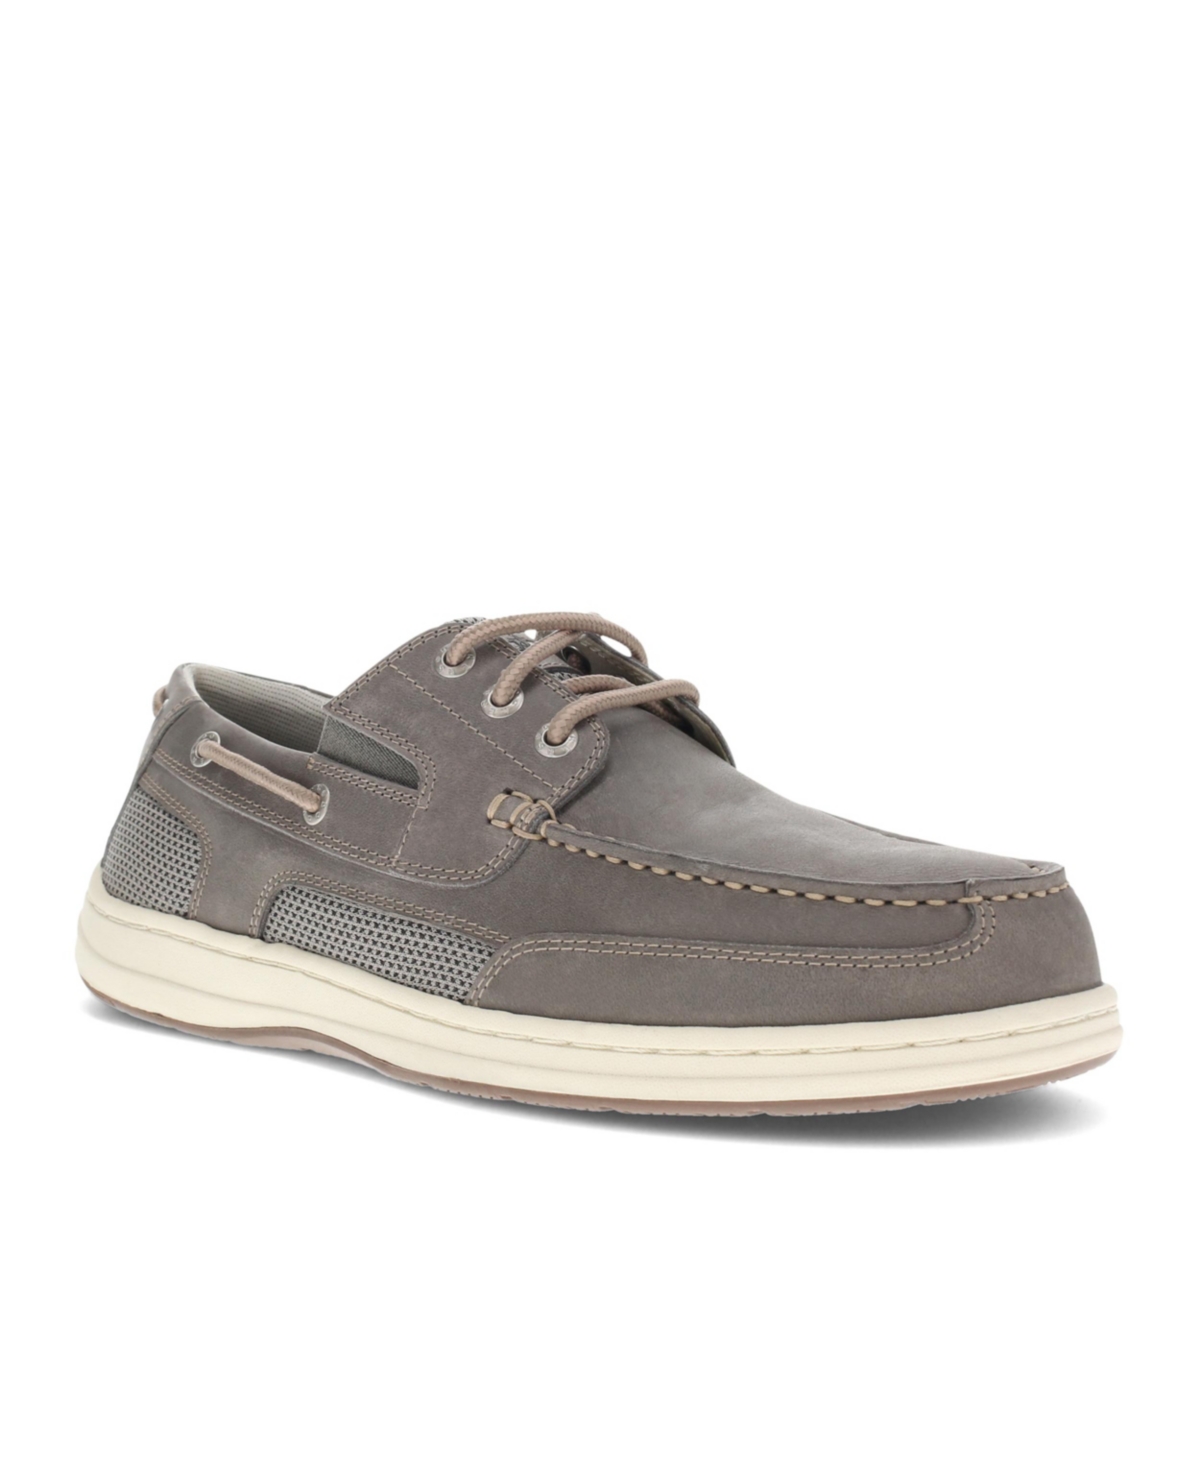 Men's Beacon Leather Casual Boat Shoe with NeverWet - Gray